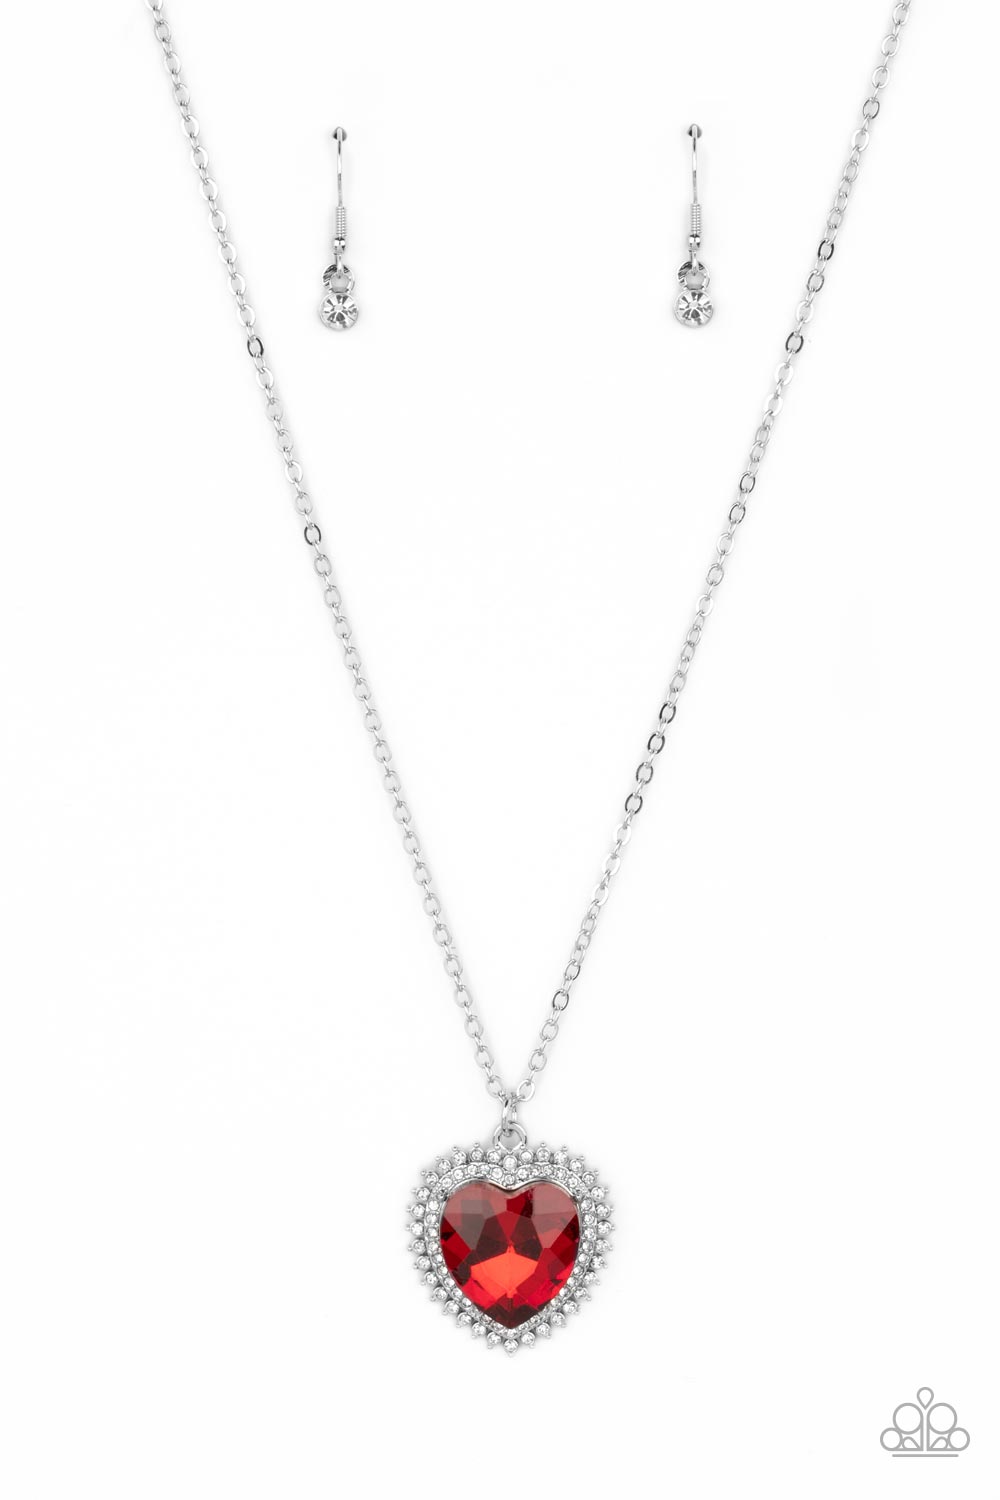 Paparazzi Necklaces - Sweethearts Stroll - Red